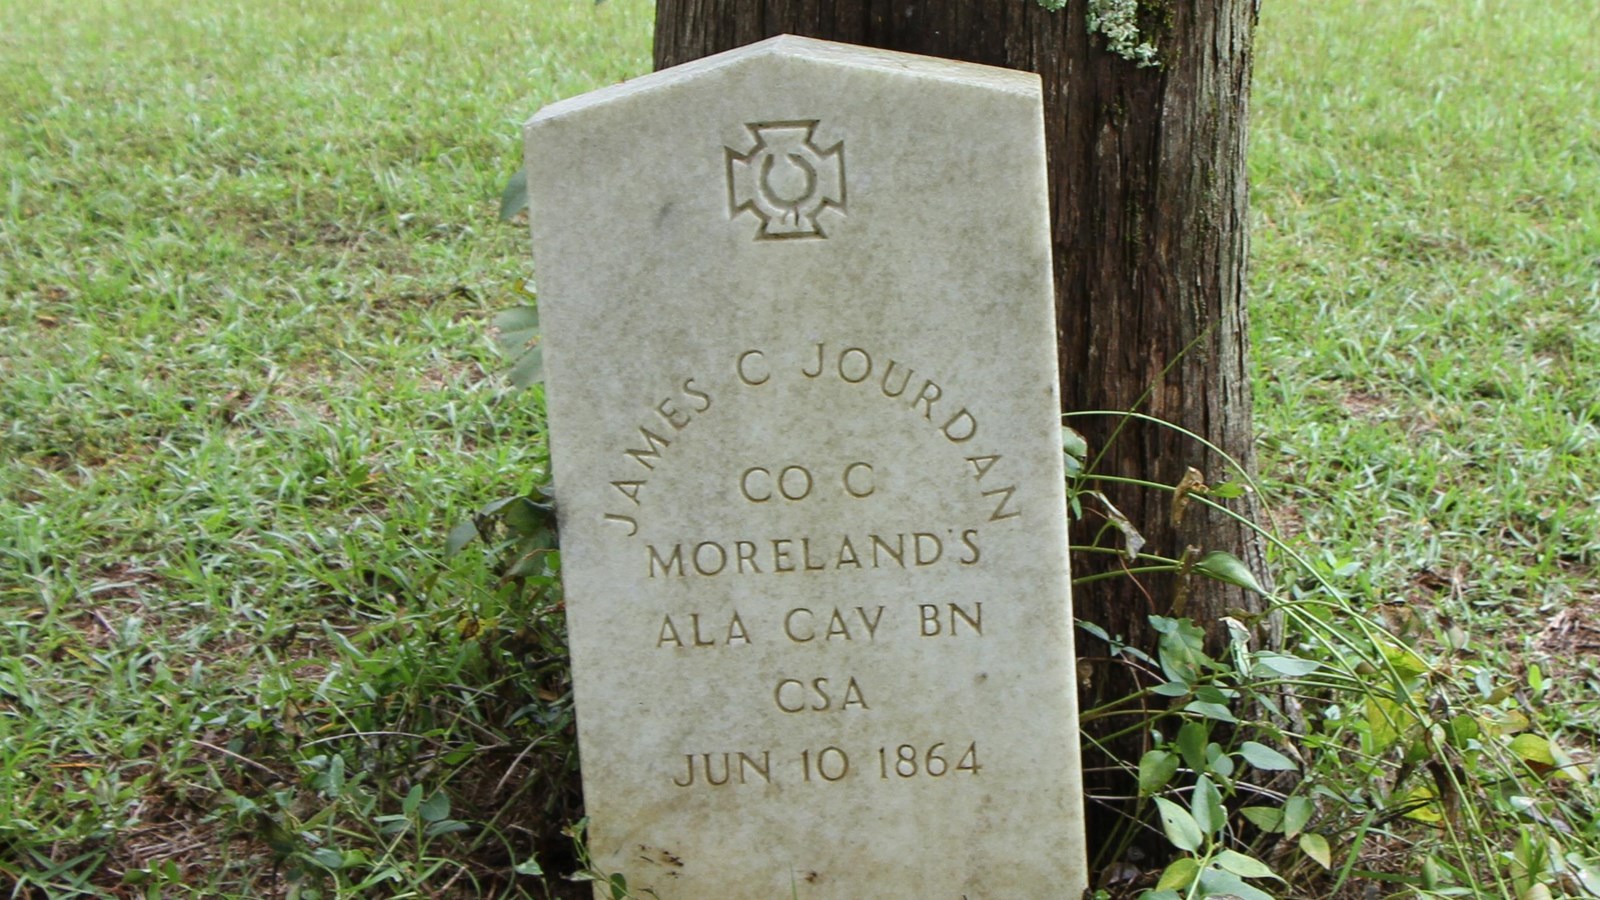 White granite tombstone in front of a cedar tree surrounded by cut grass.